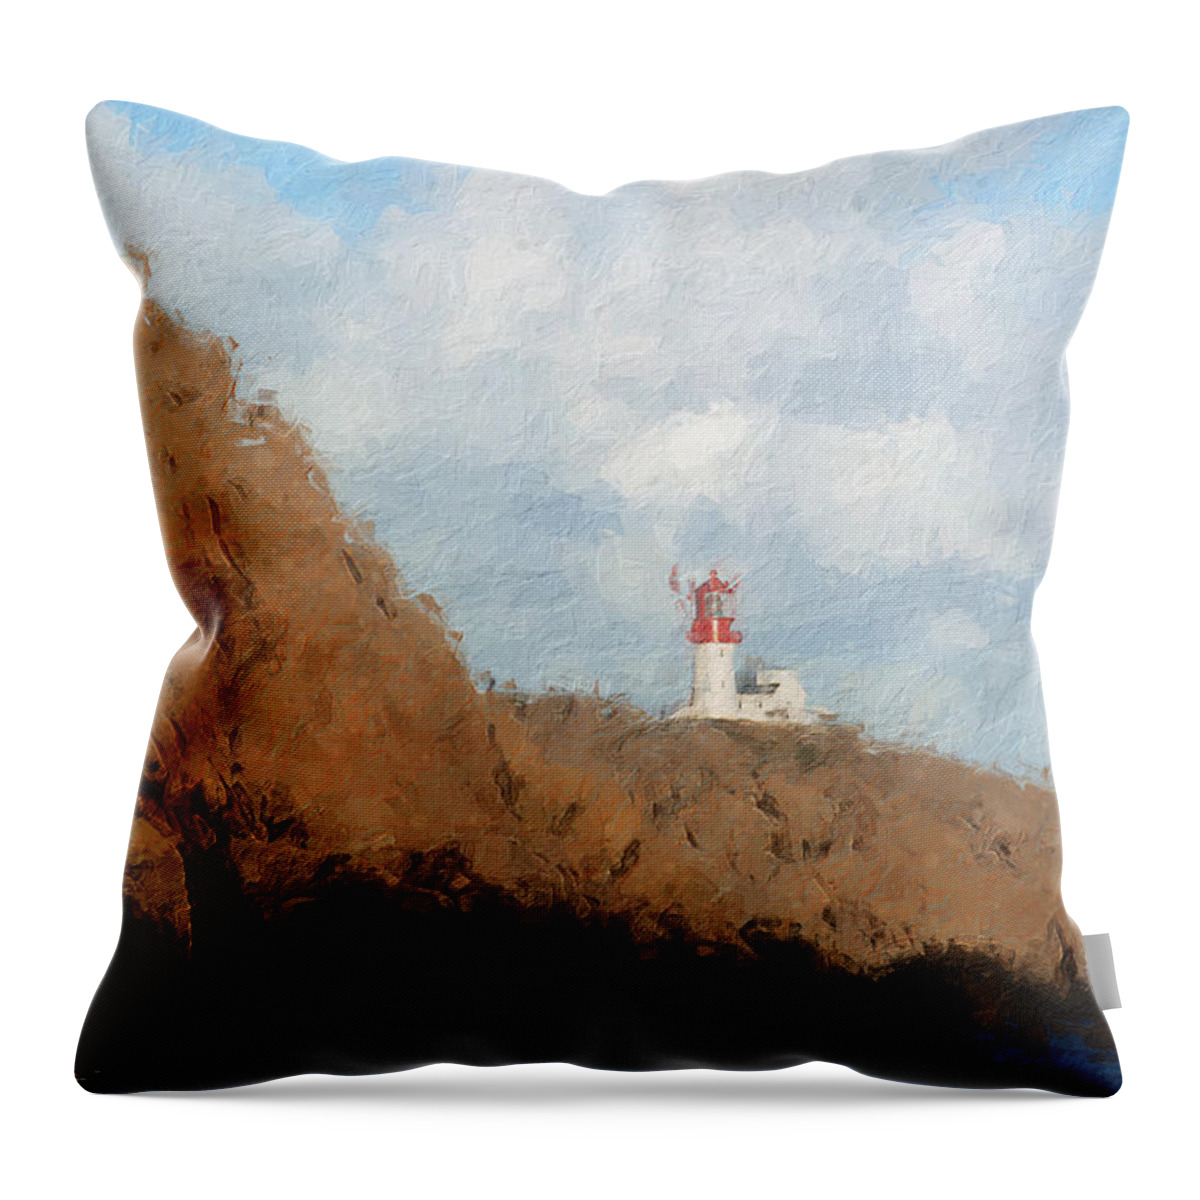 Lighthouse Throw Pillow featuring the digital art Lindesnes lighthouse by Geir Rosset